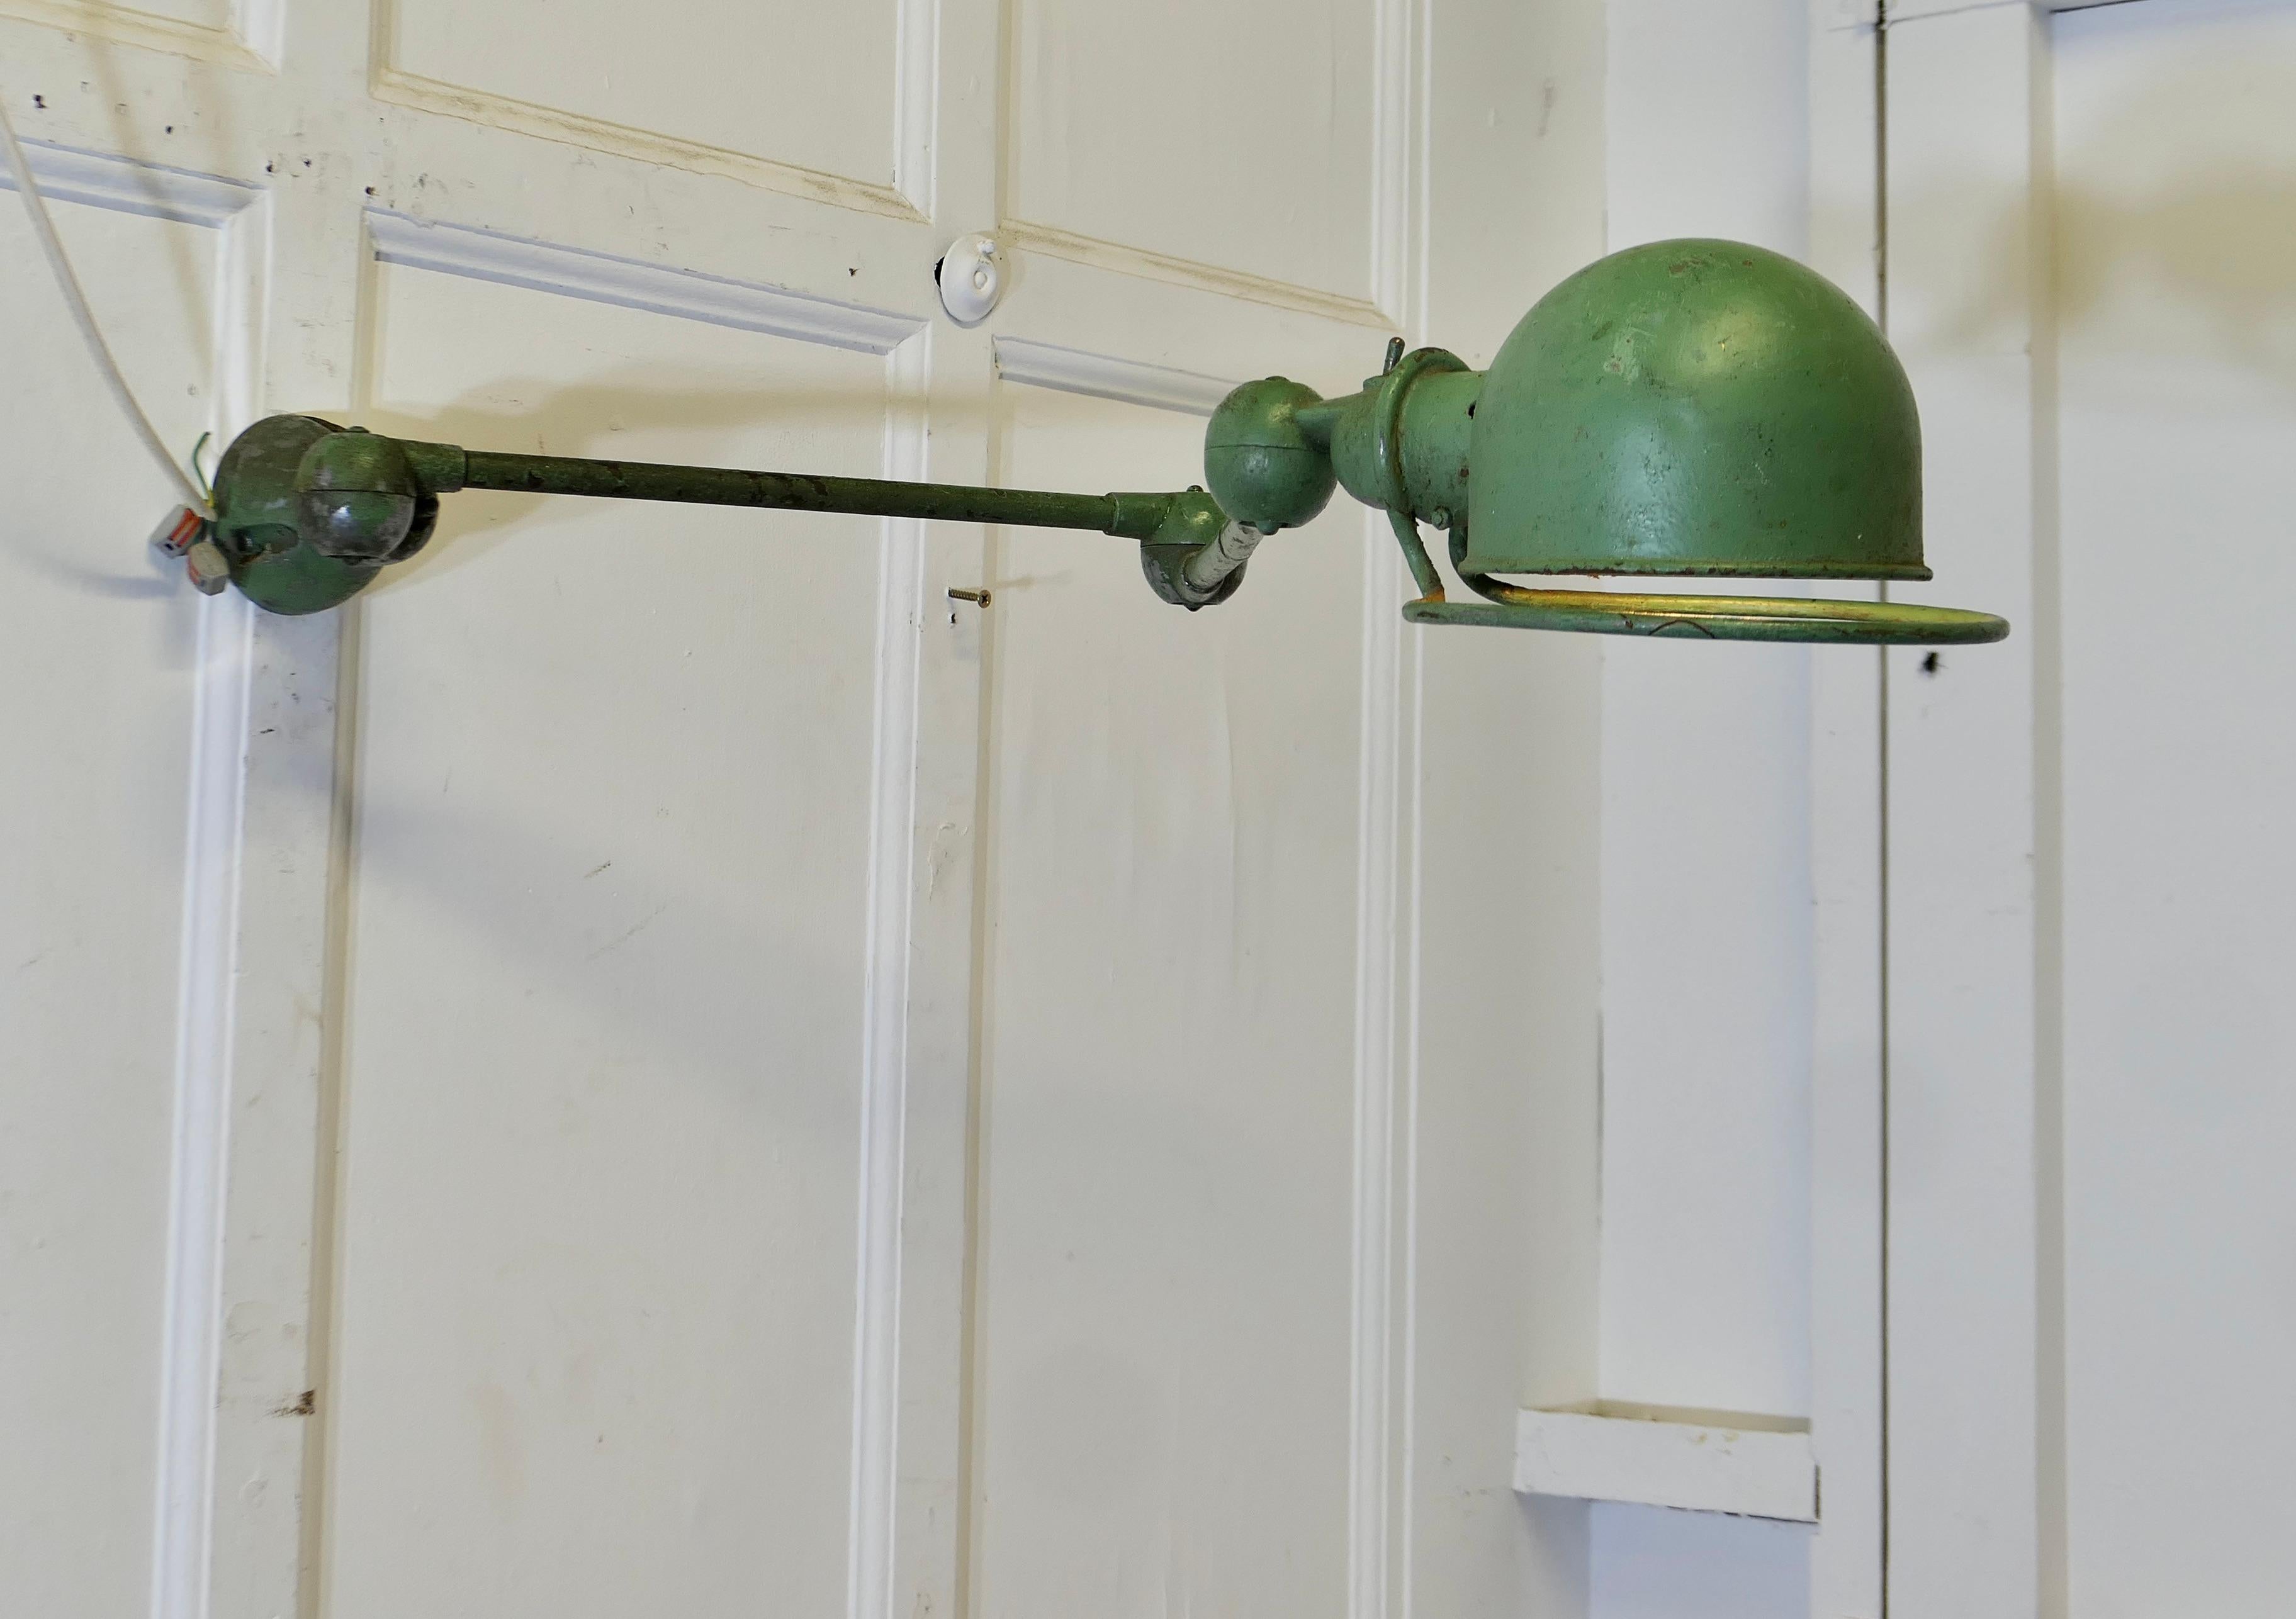 French Vintage Industrial Articulated Wall Light Sconce

This is a very unusual extendable factory light, it comes unrestored and it is working 
Fully extended the light is 47” long and the lamp shade is 8” in diameter
FB145